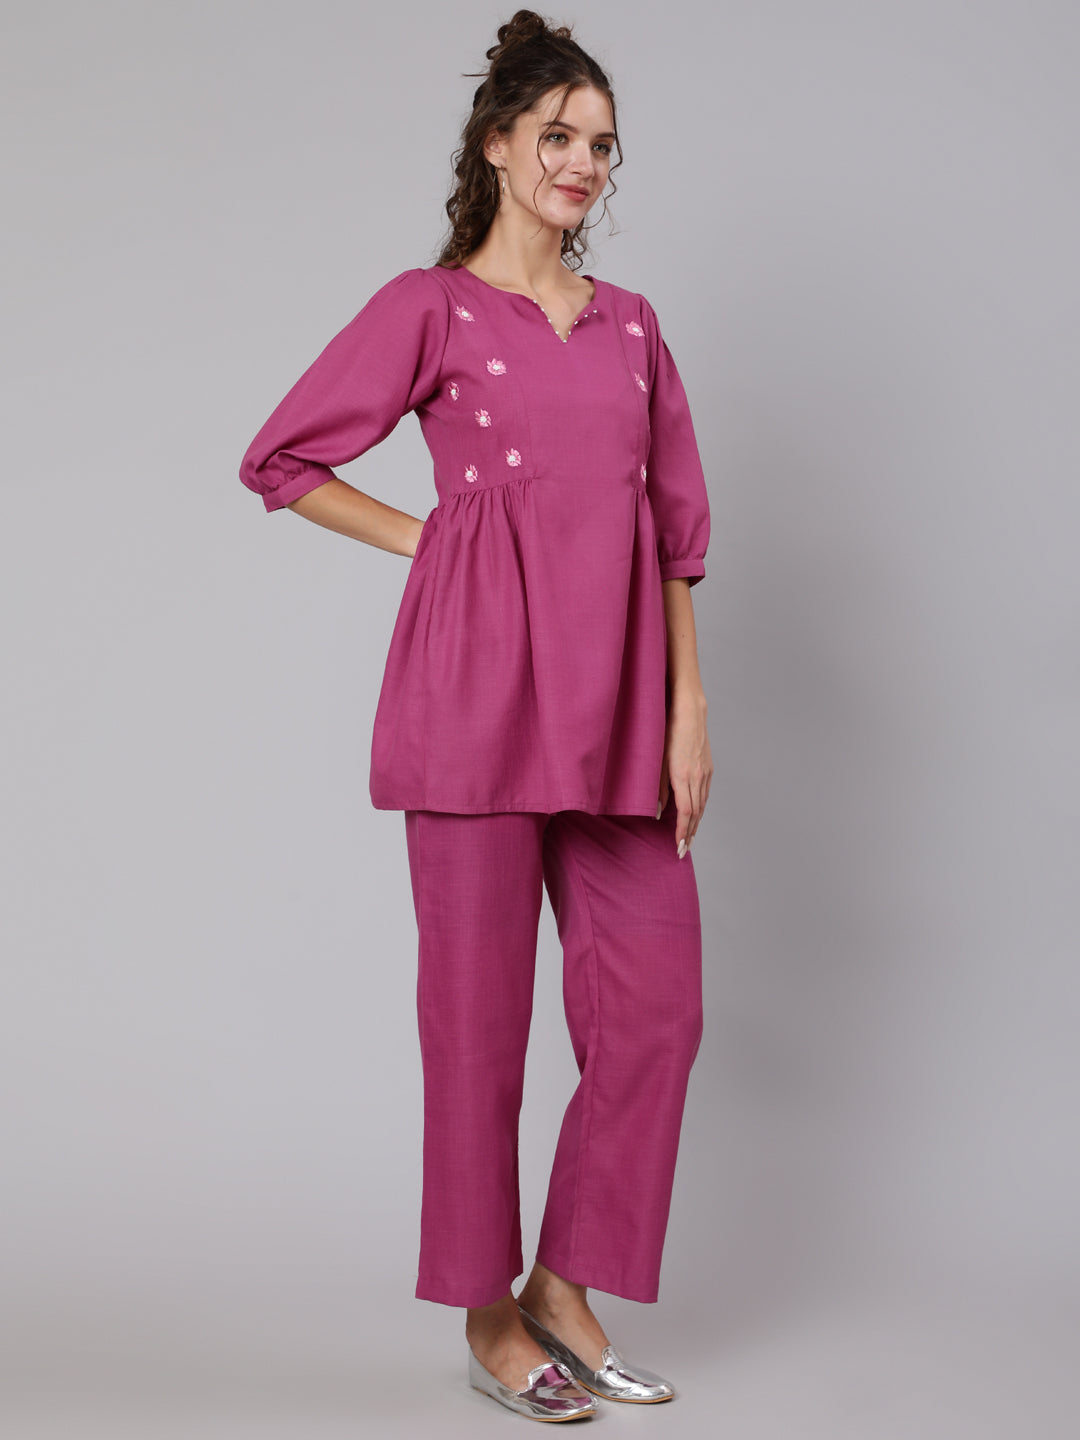 Buy Magenta Embroidered Top & Palazzo Co-Ord set | Jaipur Kurti 	Shop Stylish Magenta Co-Ord Set Online for Women. Buy Latest Embroidered Bead Work Flared Top with Puffed Sleeves & Magenta Palazzo at Jaipur Kurti at Diwali Sale 